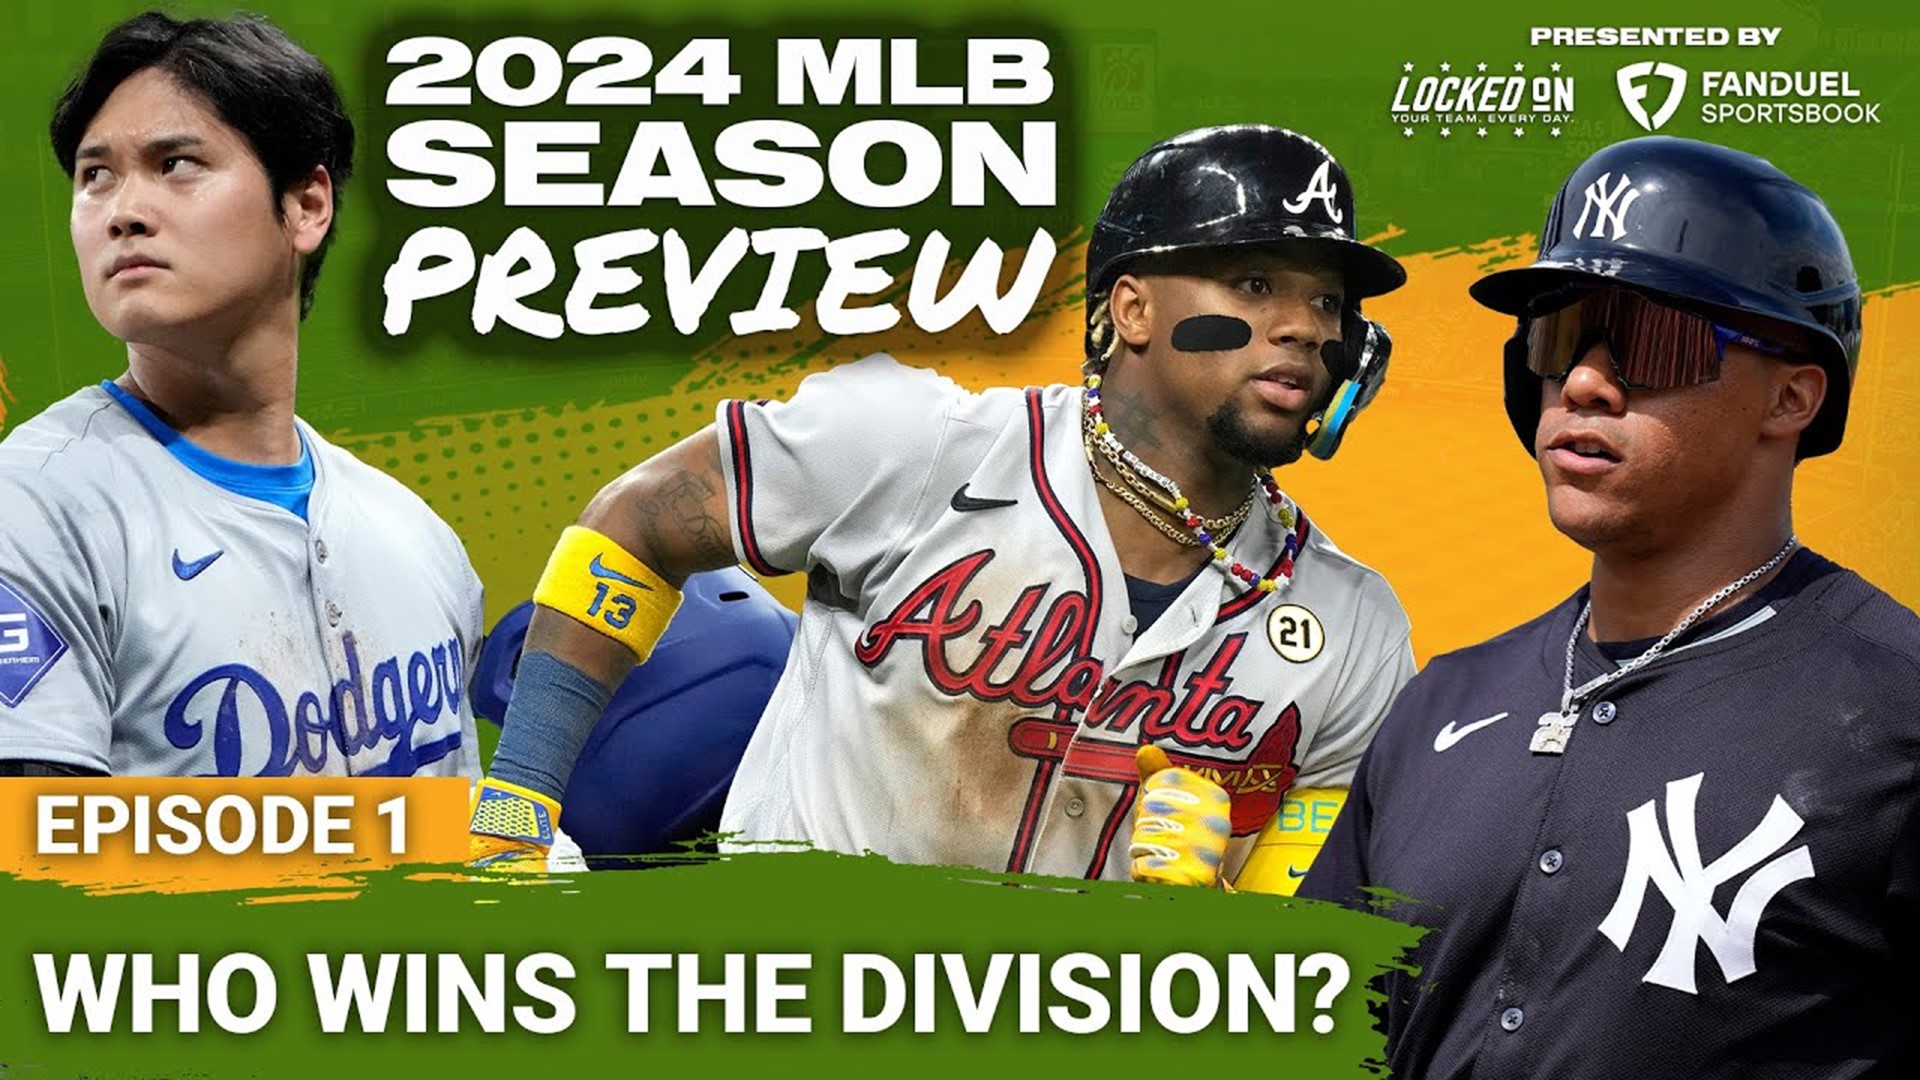 MLB SEASON PREVIEW: Will the Brewer, Cubs, Reds, Pirates or Cardinals win the NL Central?